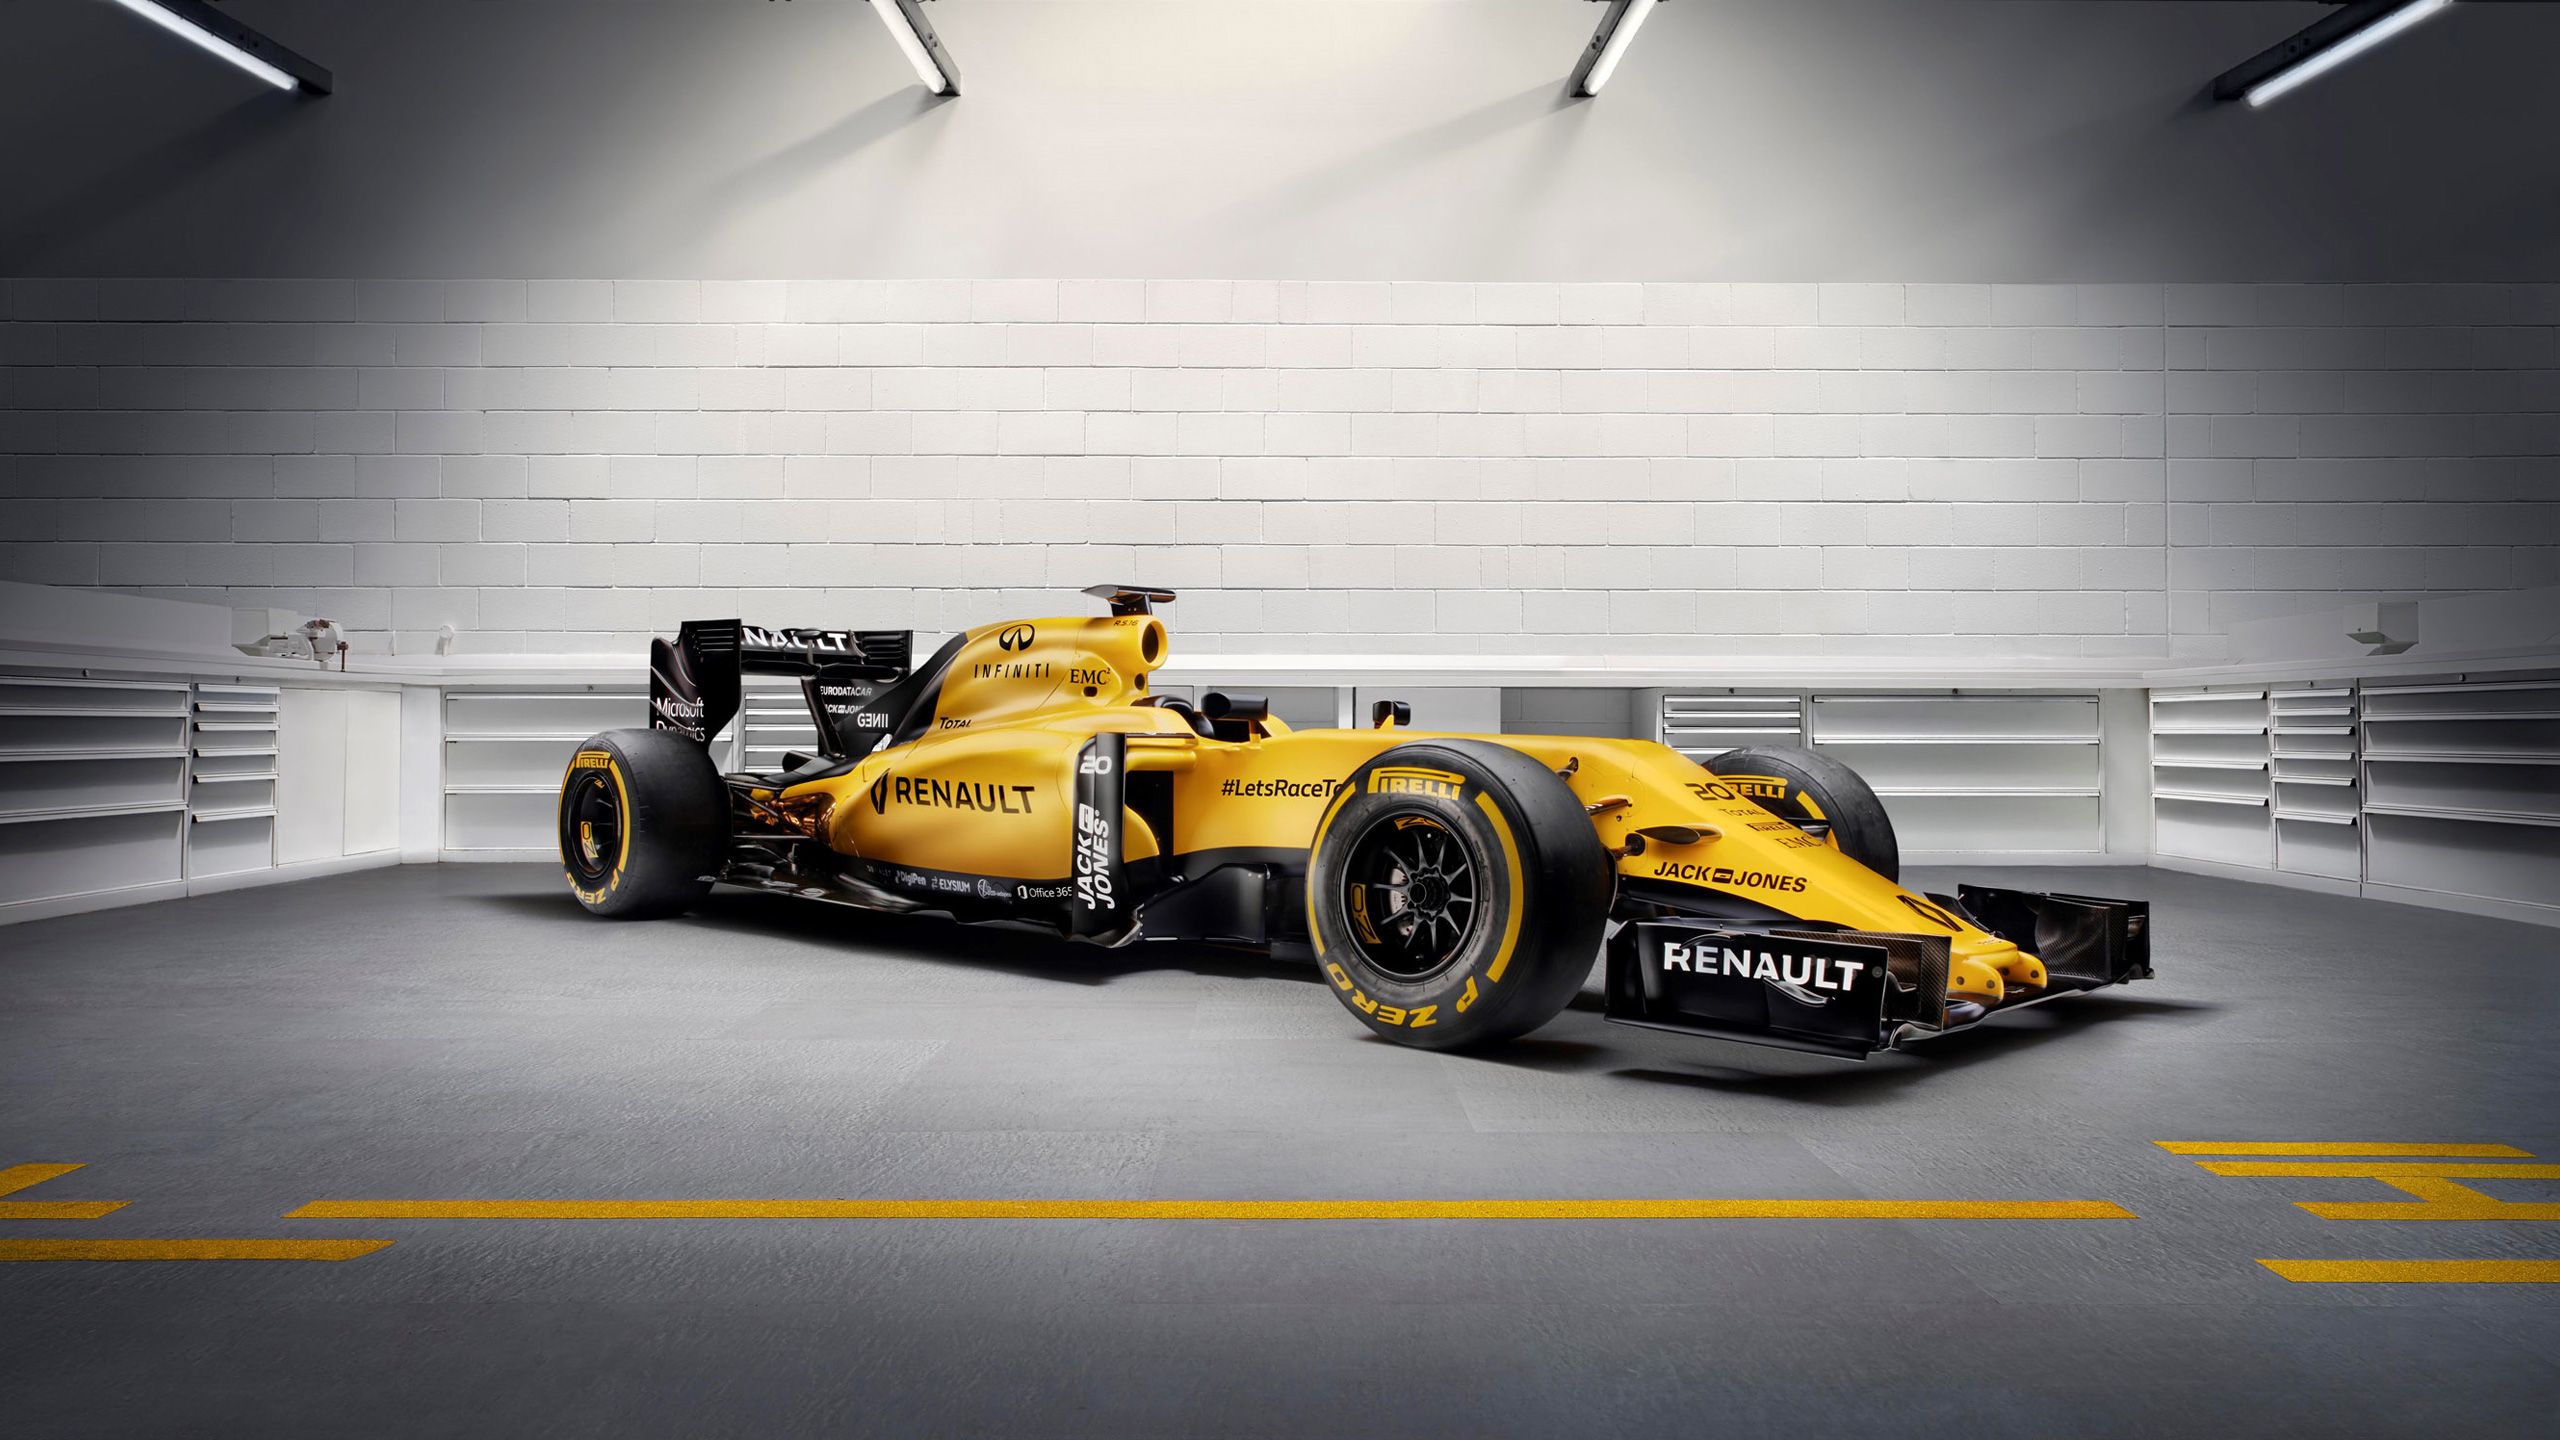 F1 Racing Cars Hd Wallpapers Best Cars Wallpapers Images, Photos, Reviews